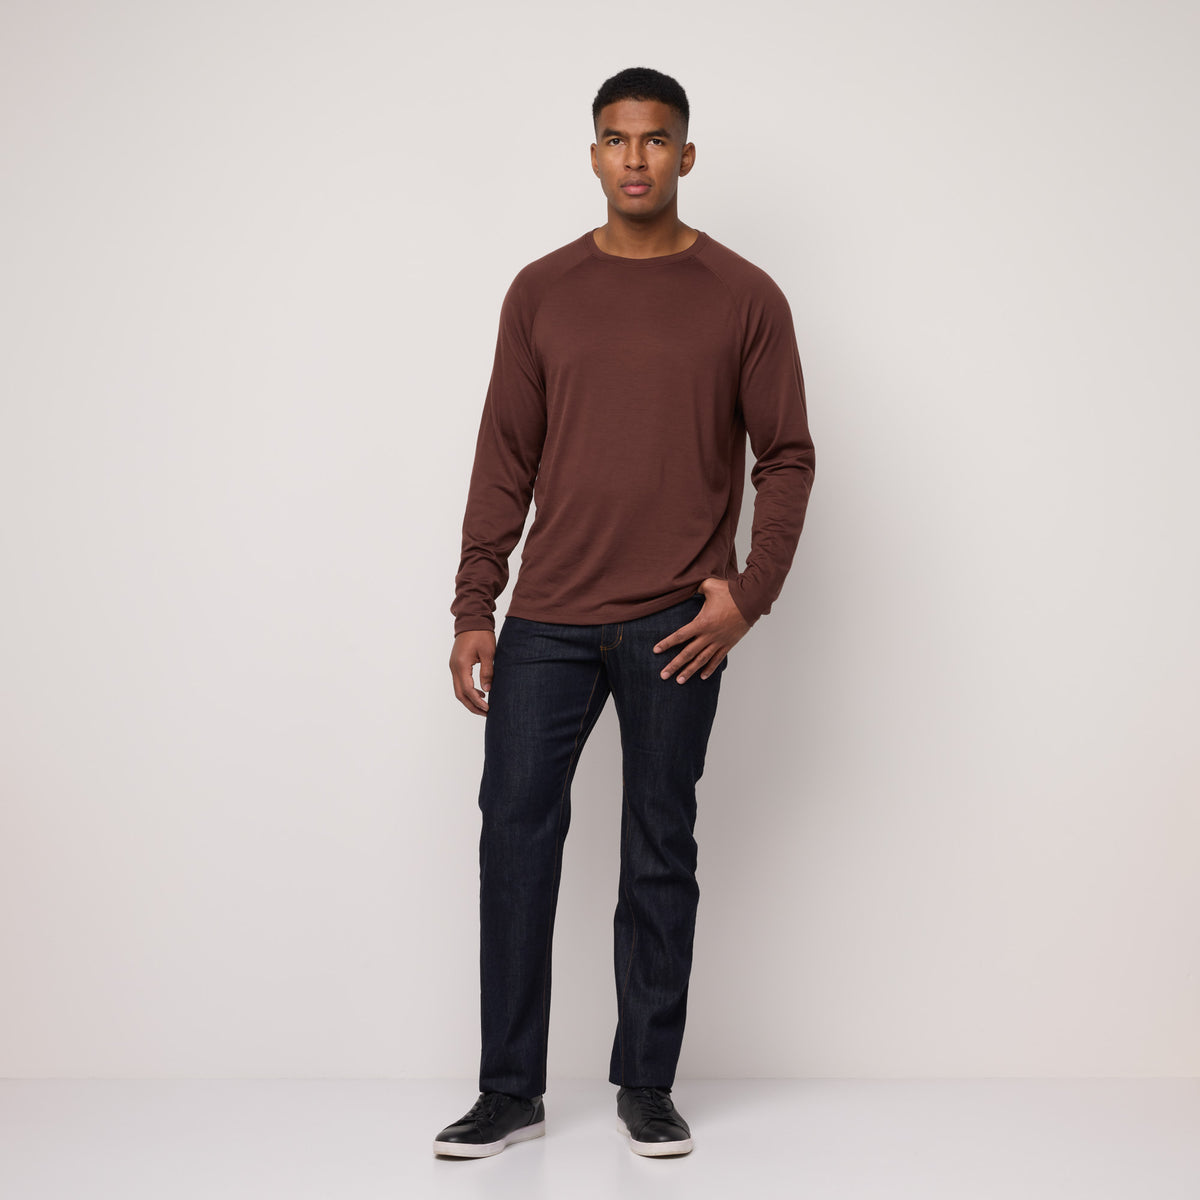 image-on-hover,model-spec: Micah is 6'1", 185 lbs, and wears size L